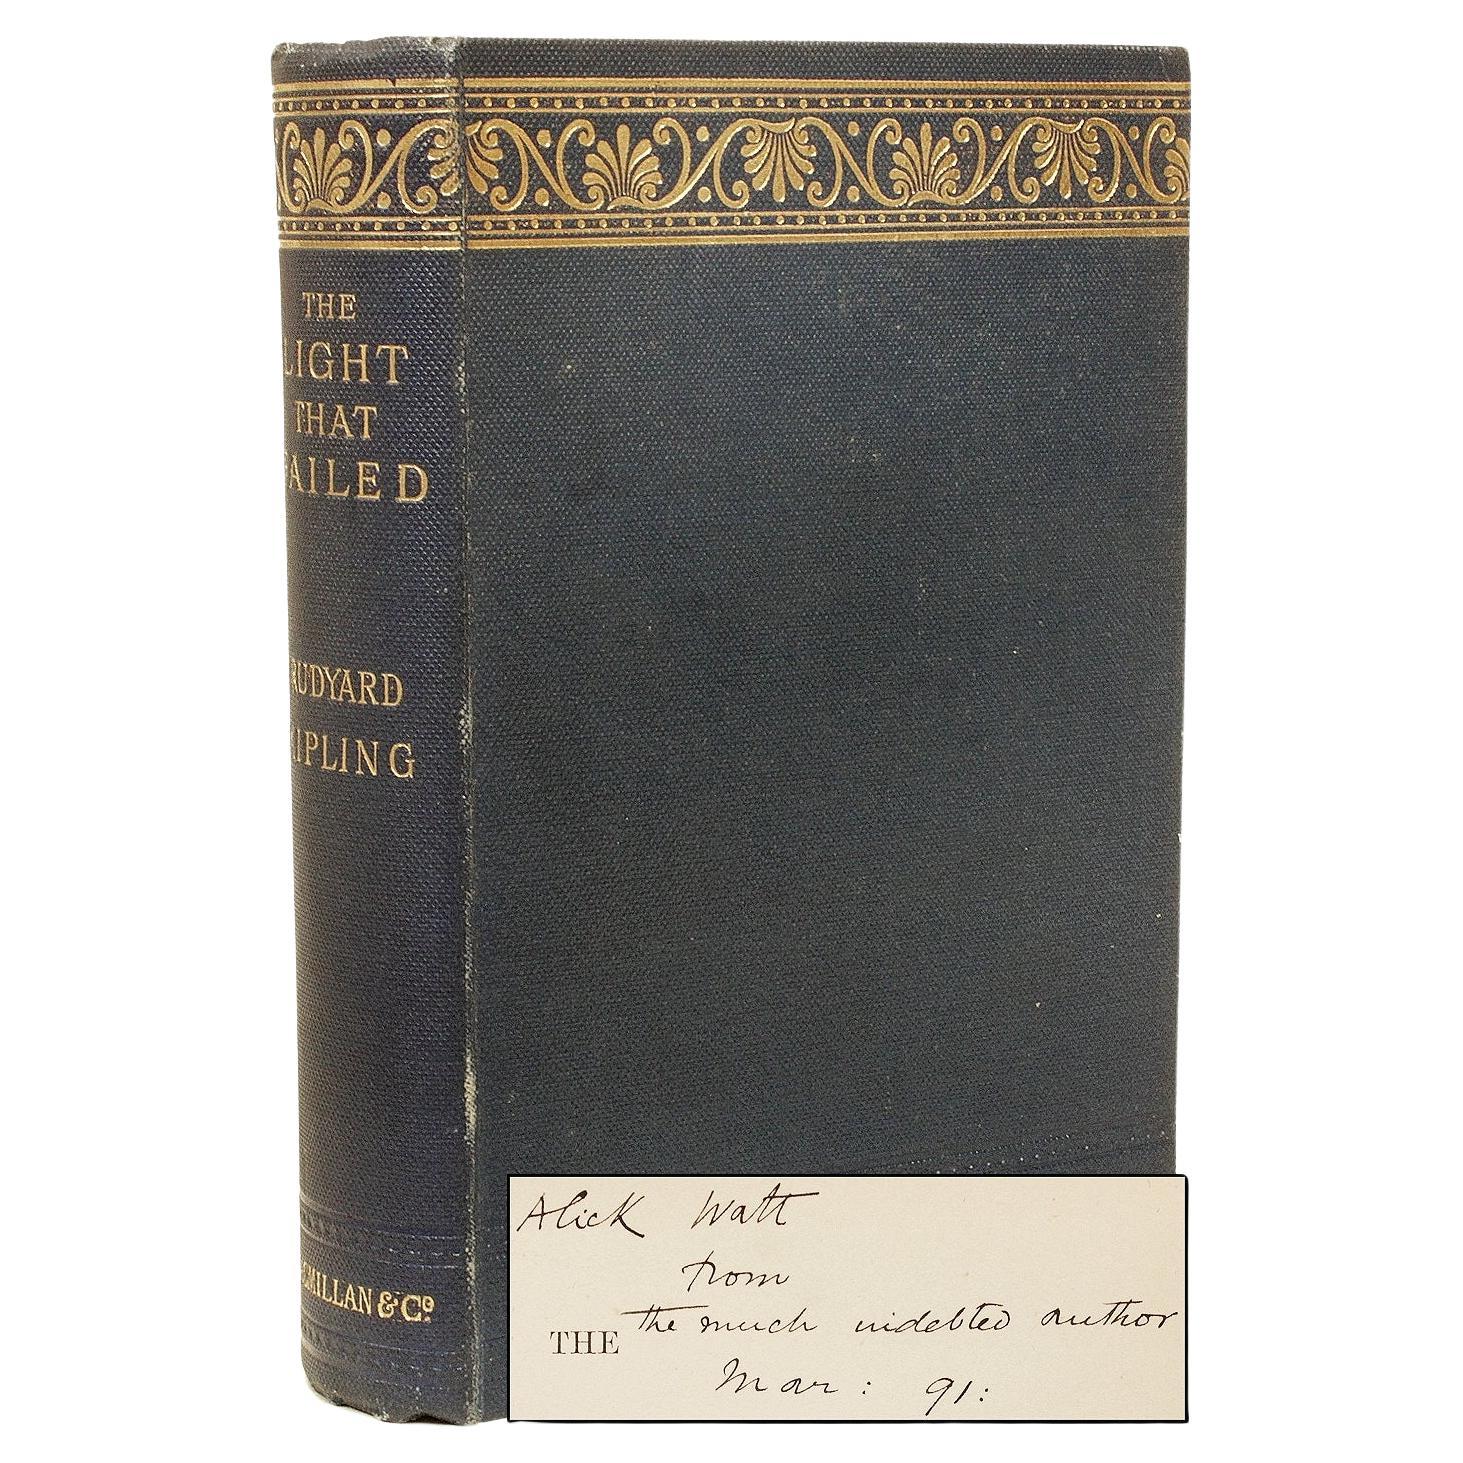 Rudyard KIPLING. The Light That Failed. 1891 - FIRST EDITION PRESENTATION COPY! For Sale